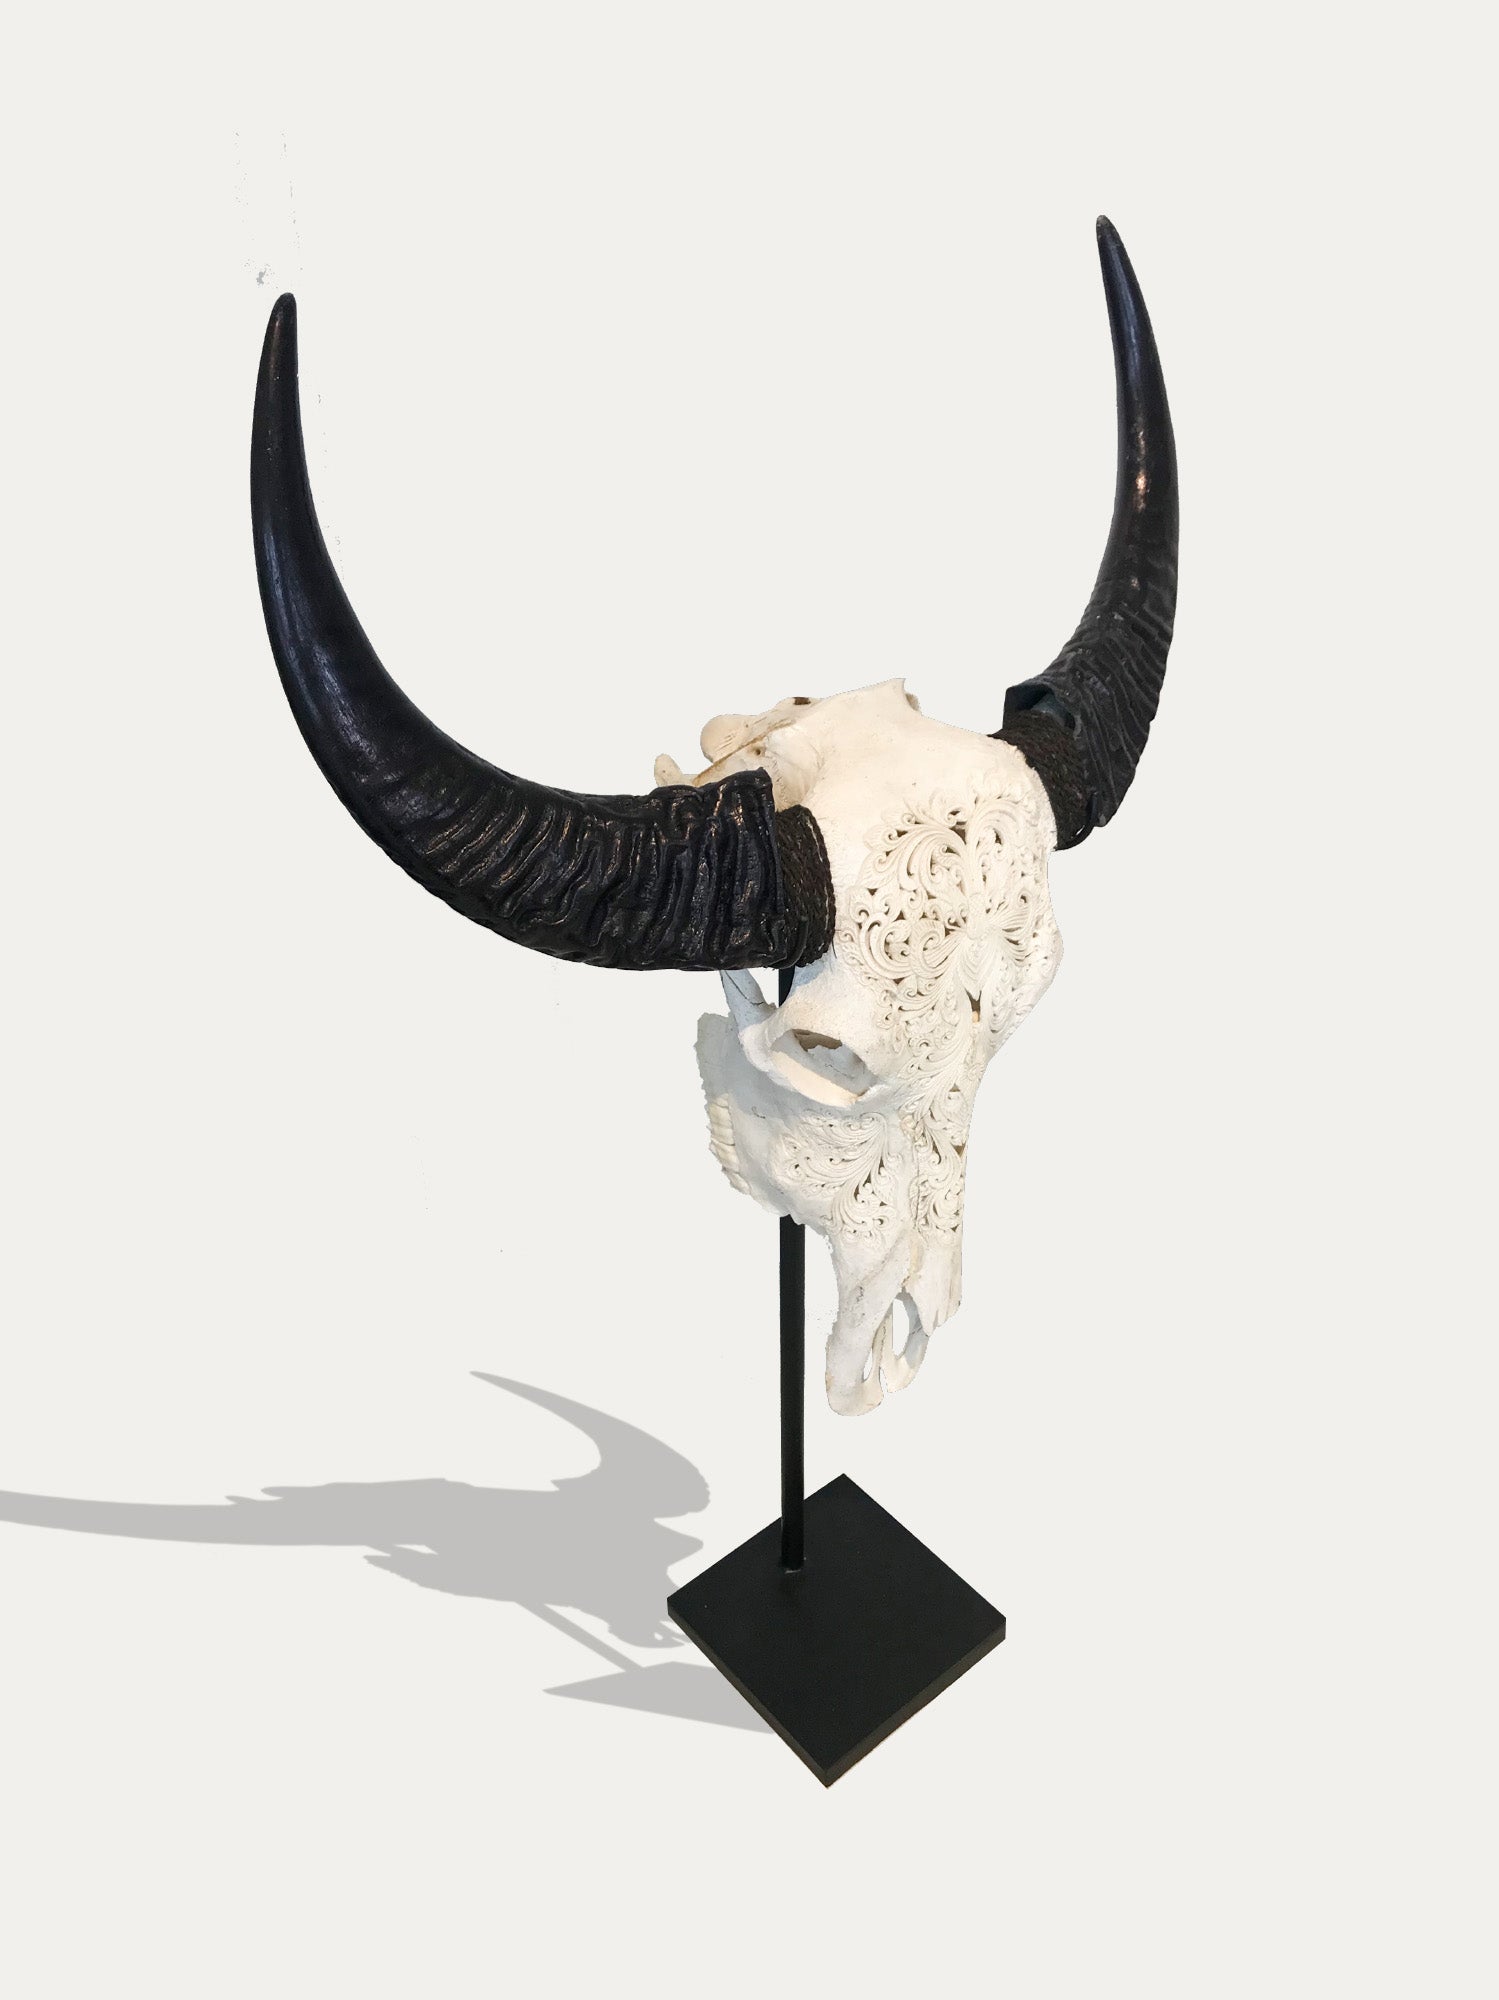 Hand Carved Buffalo Scull From Bali - Asian Art from Kirschon